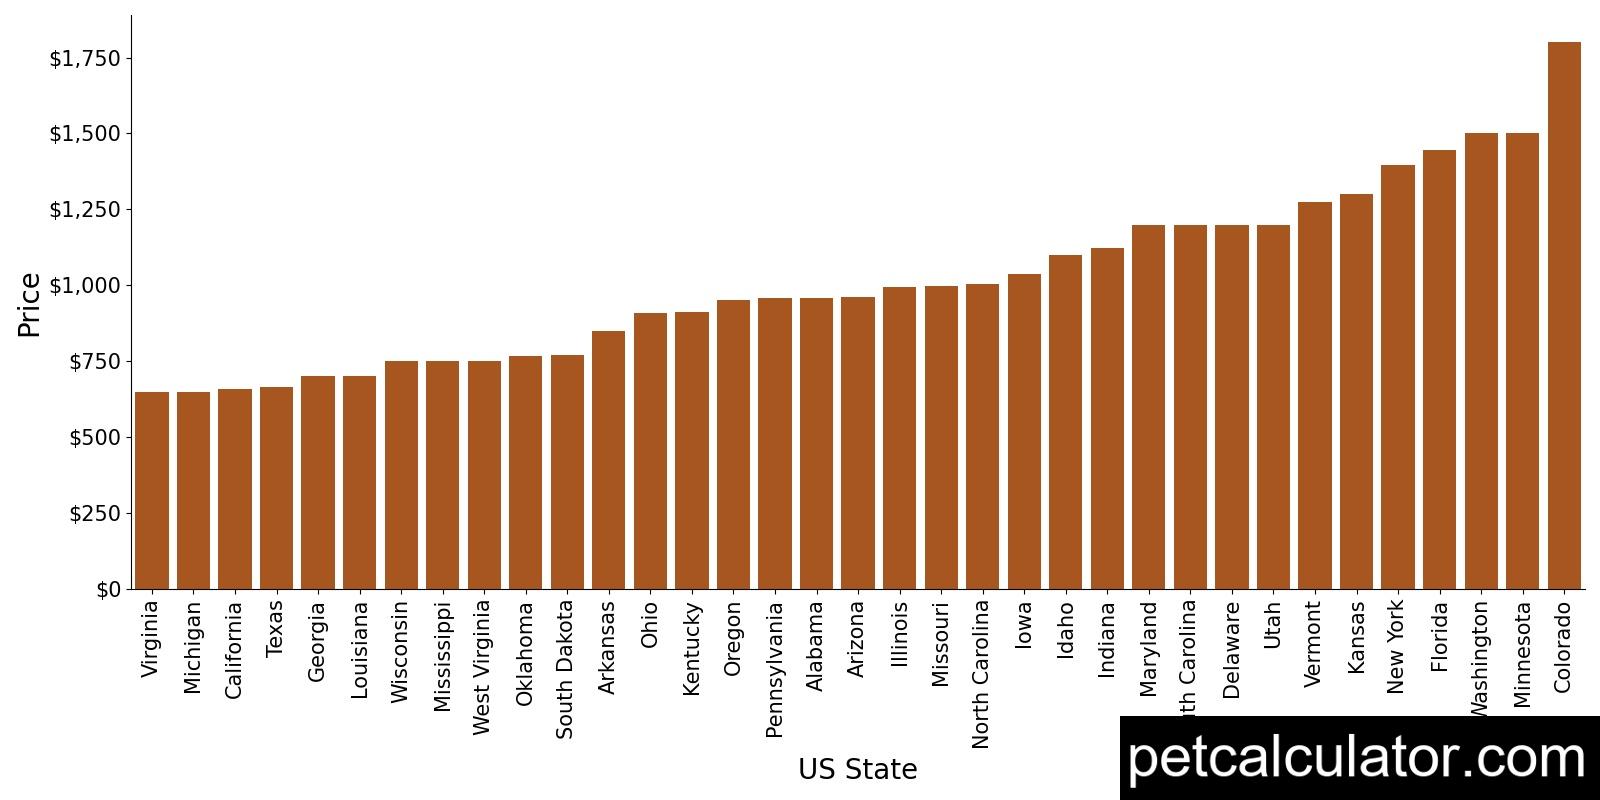 Price of Weimaraner by US State 